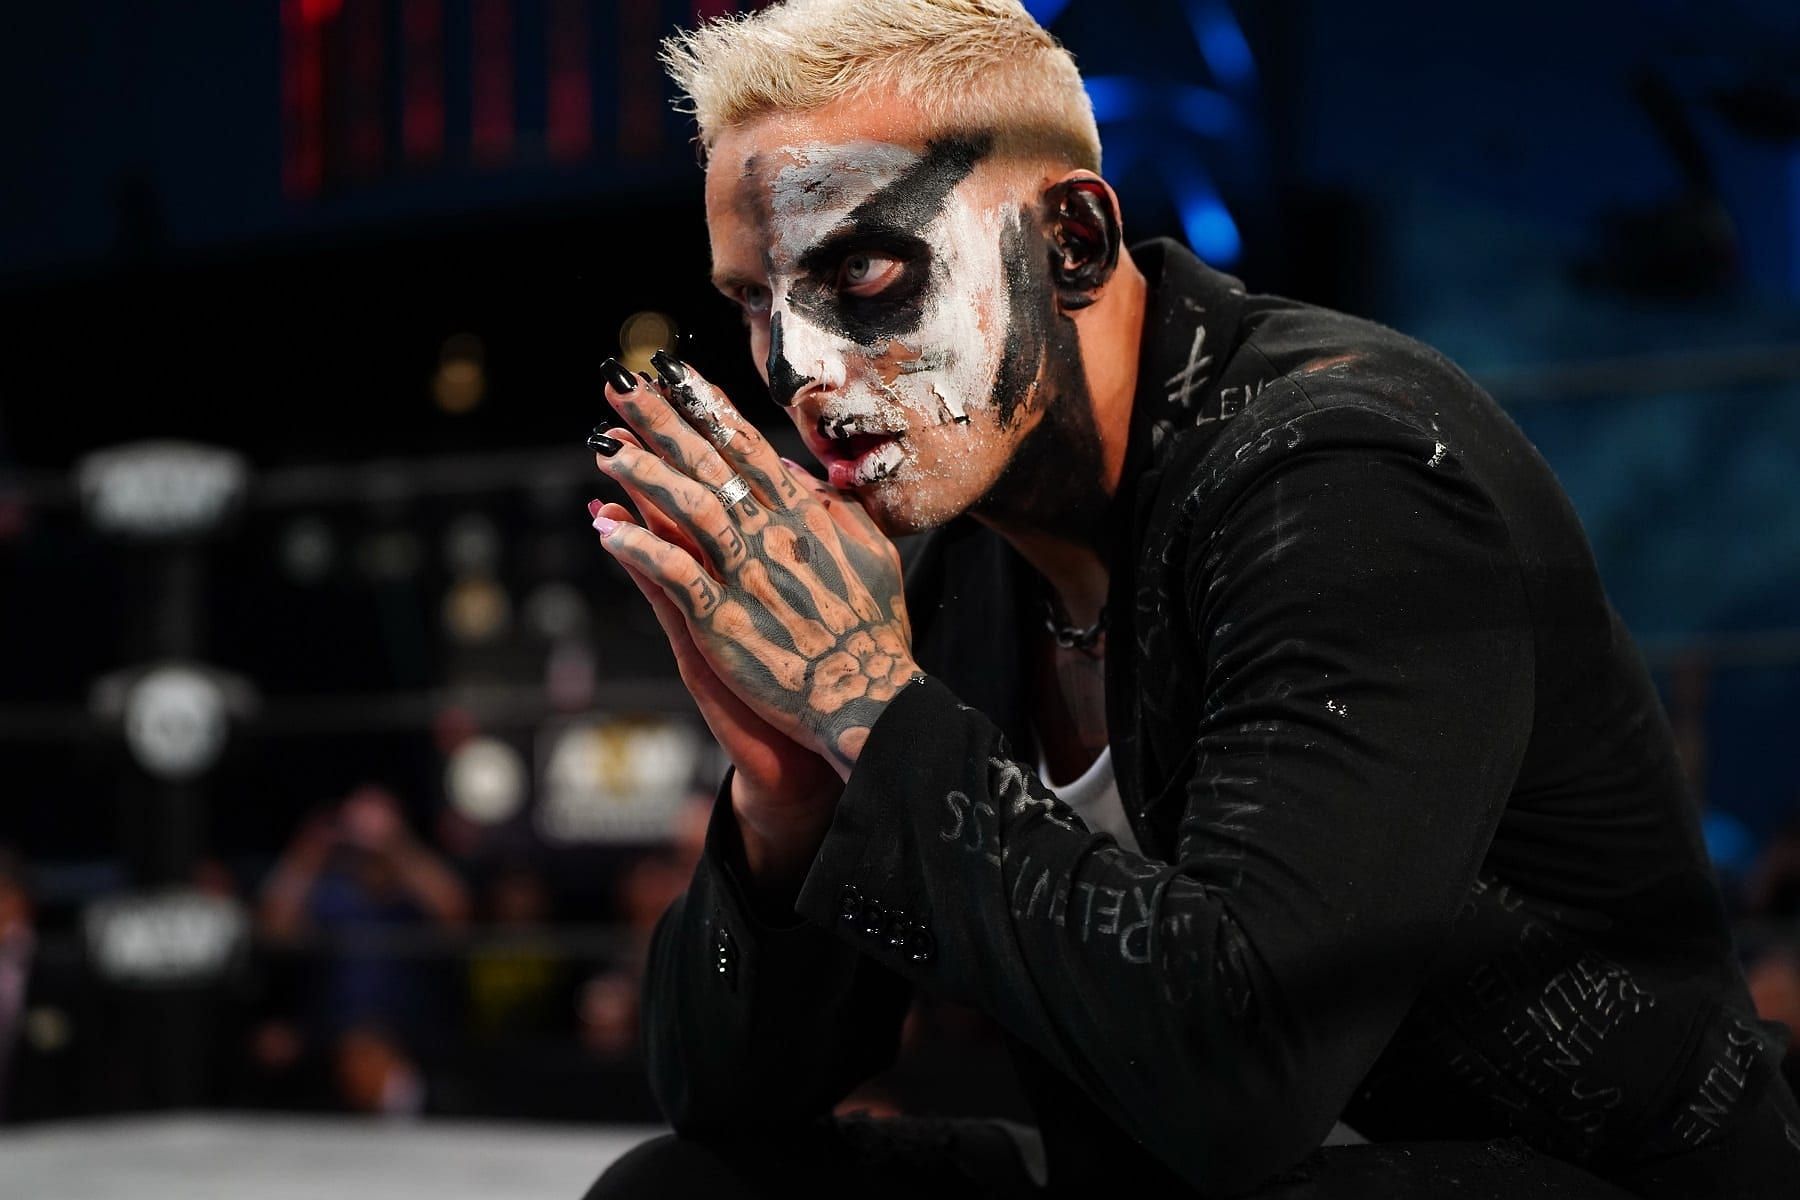 Darby Allin was victorious at AEW Revolution 2022.